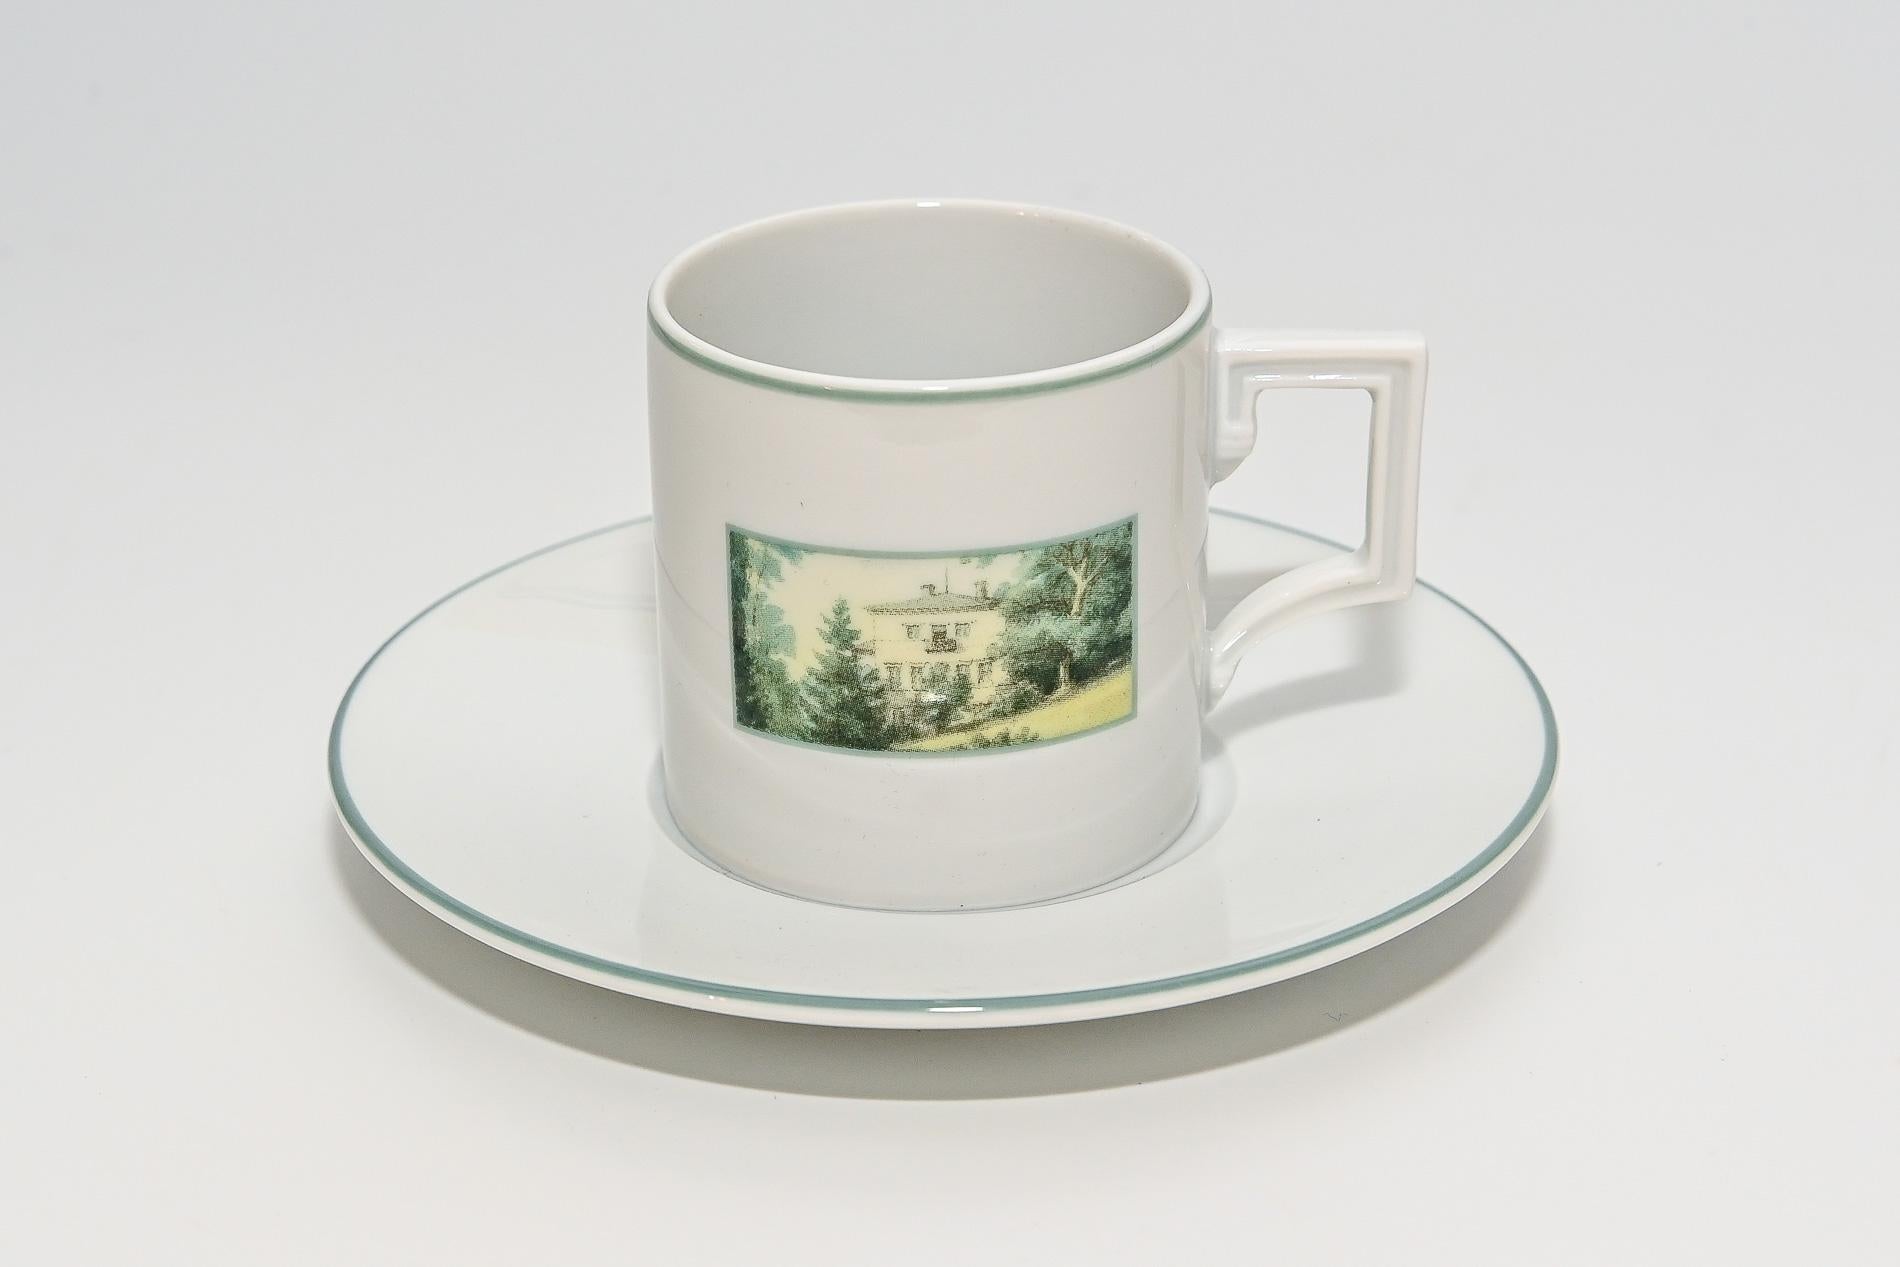 hard Wagners first residence in Bayreuth was in Fantasia, next to Donndorf Castle. The picture on the porcelain is after a watercolor by Susanne Schinkel, the daughter of the famous Berlin architect Schinkel. the picture Showa the apartment with